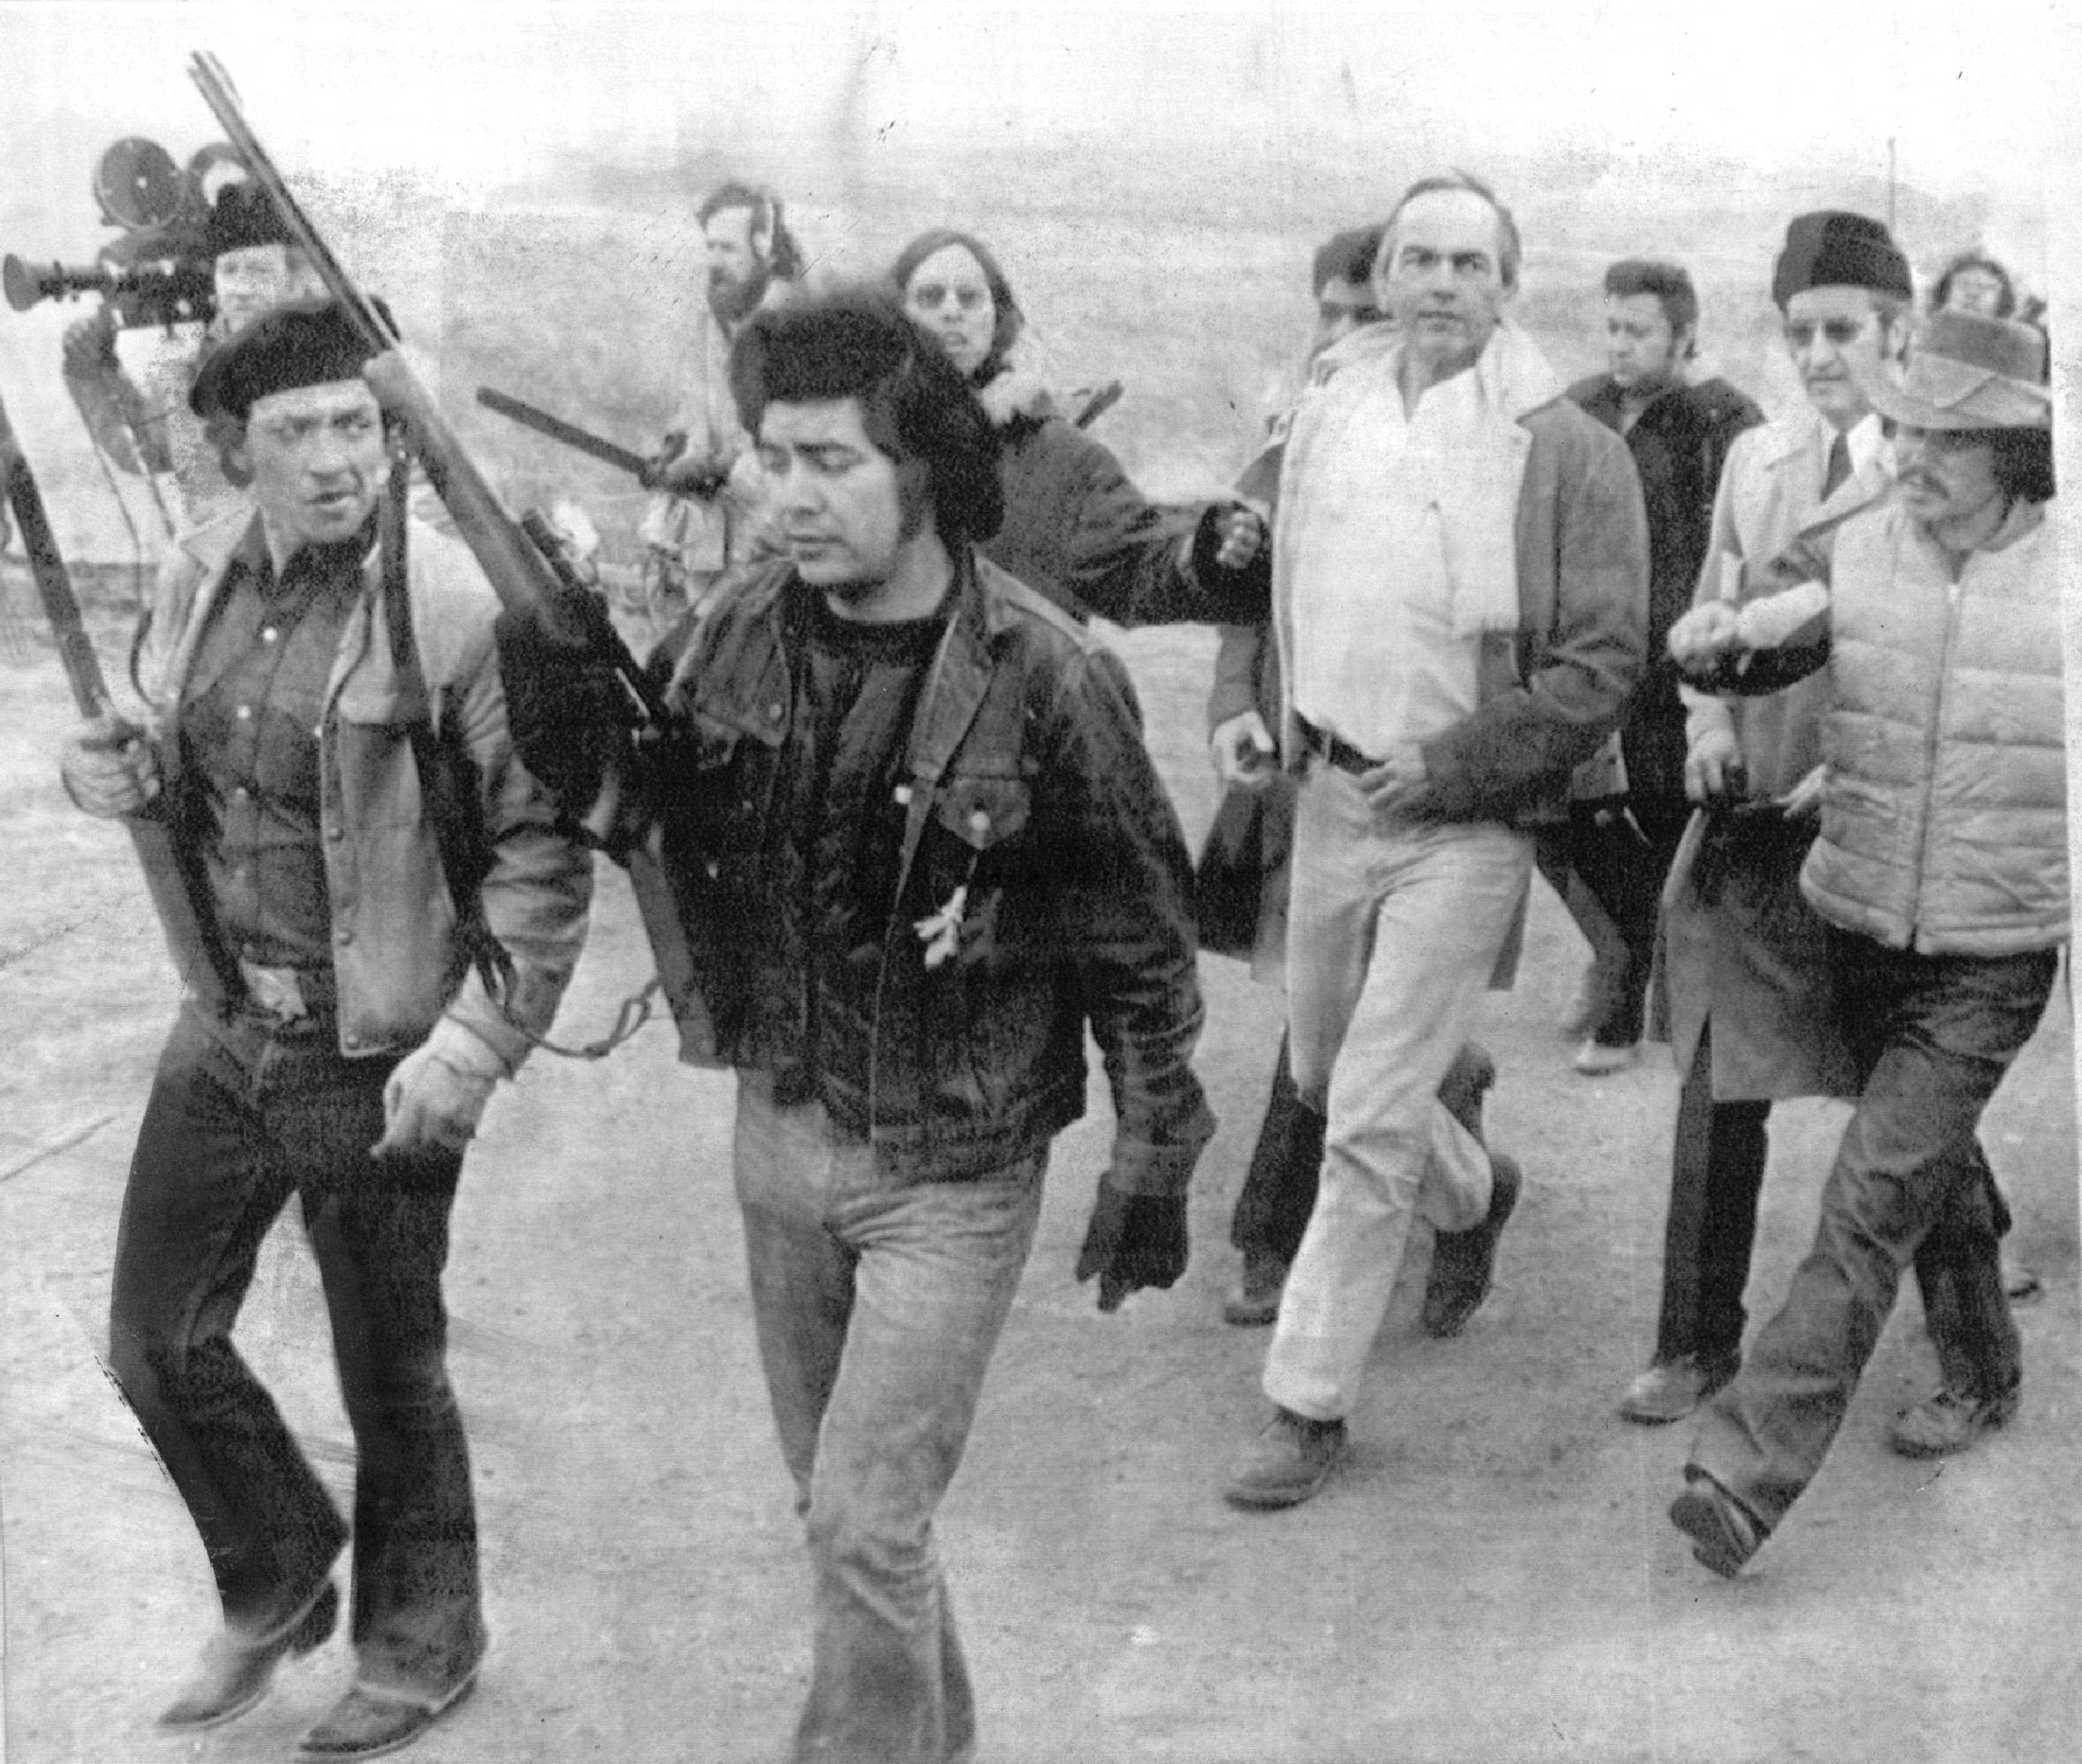 Black and white photograph of ten men walking. Some are armed. One man is carrying a large camera.